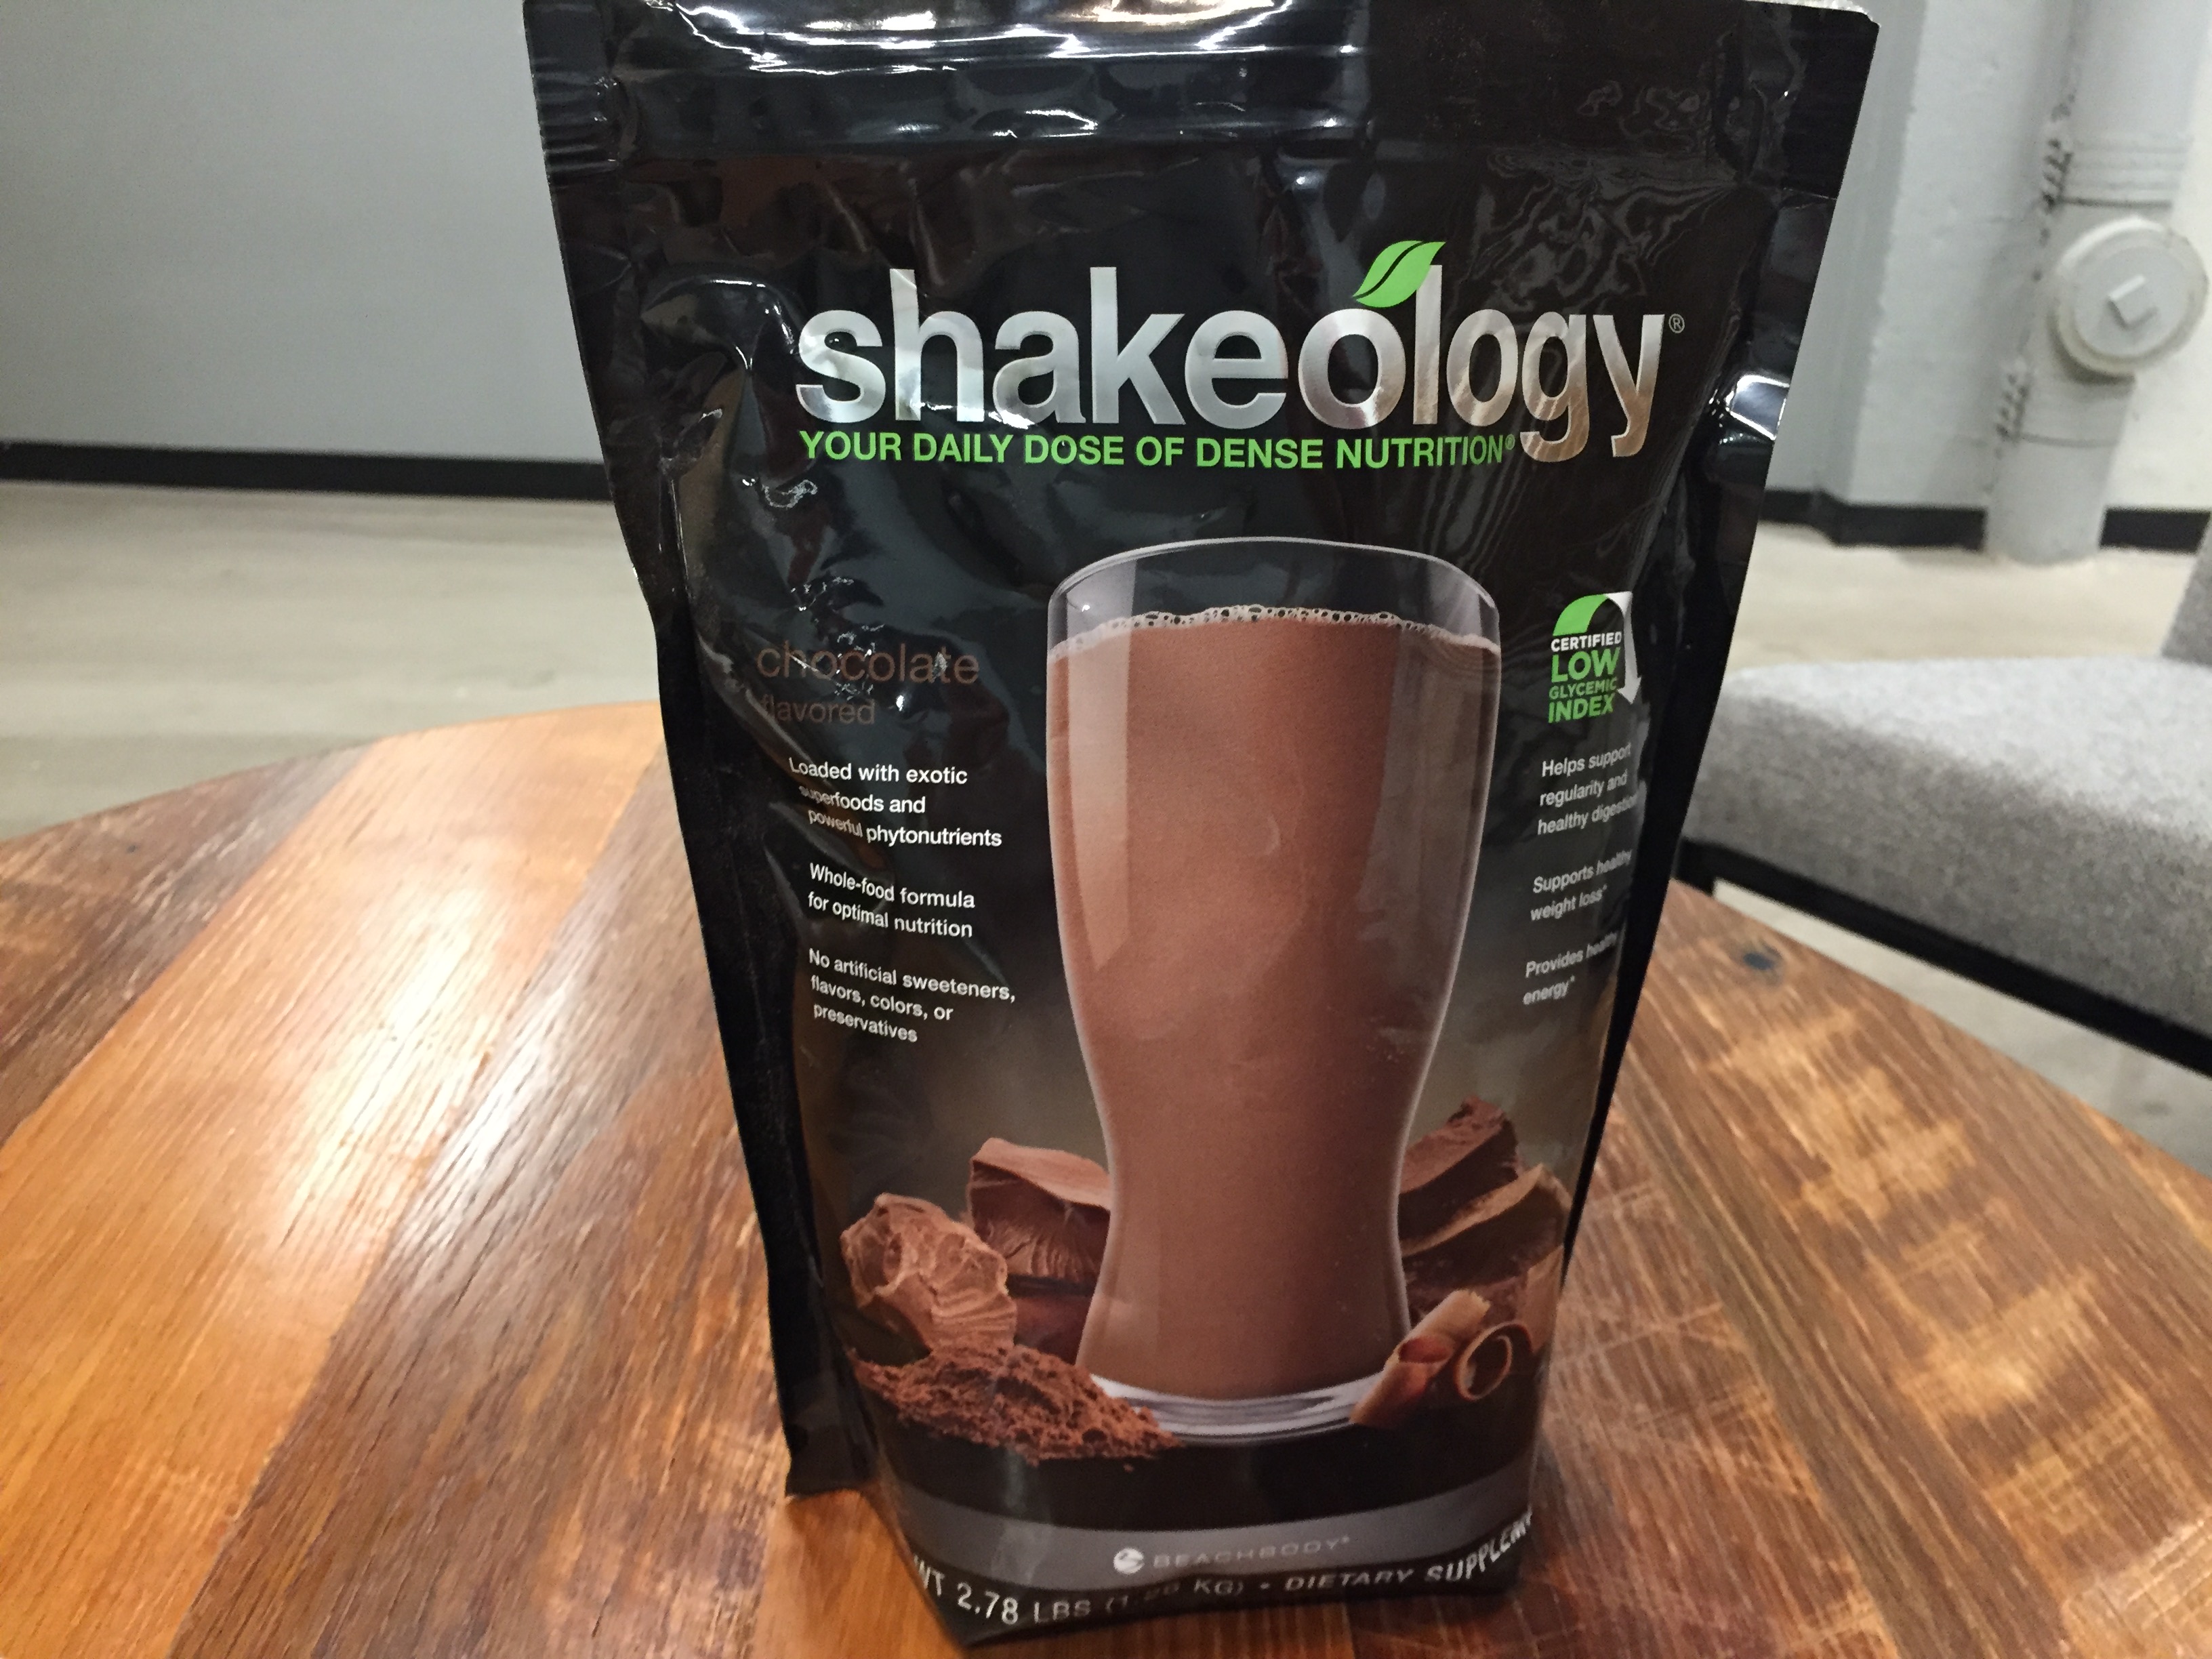 Getting The Review Of Shakeology Boost Supplements - Fit With Farrar To Work